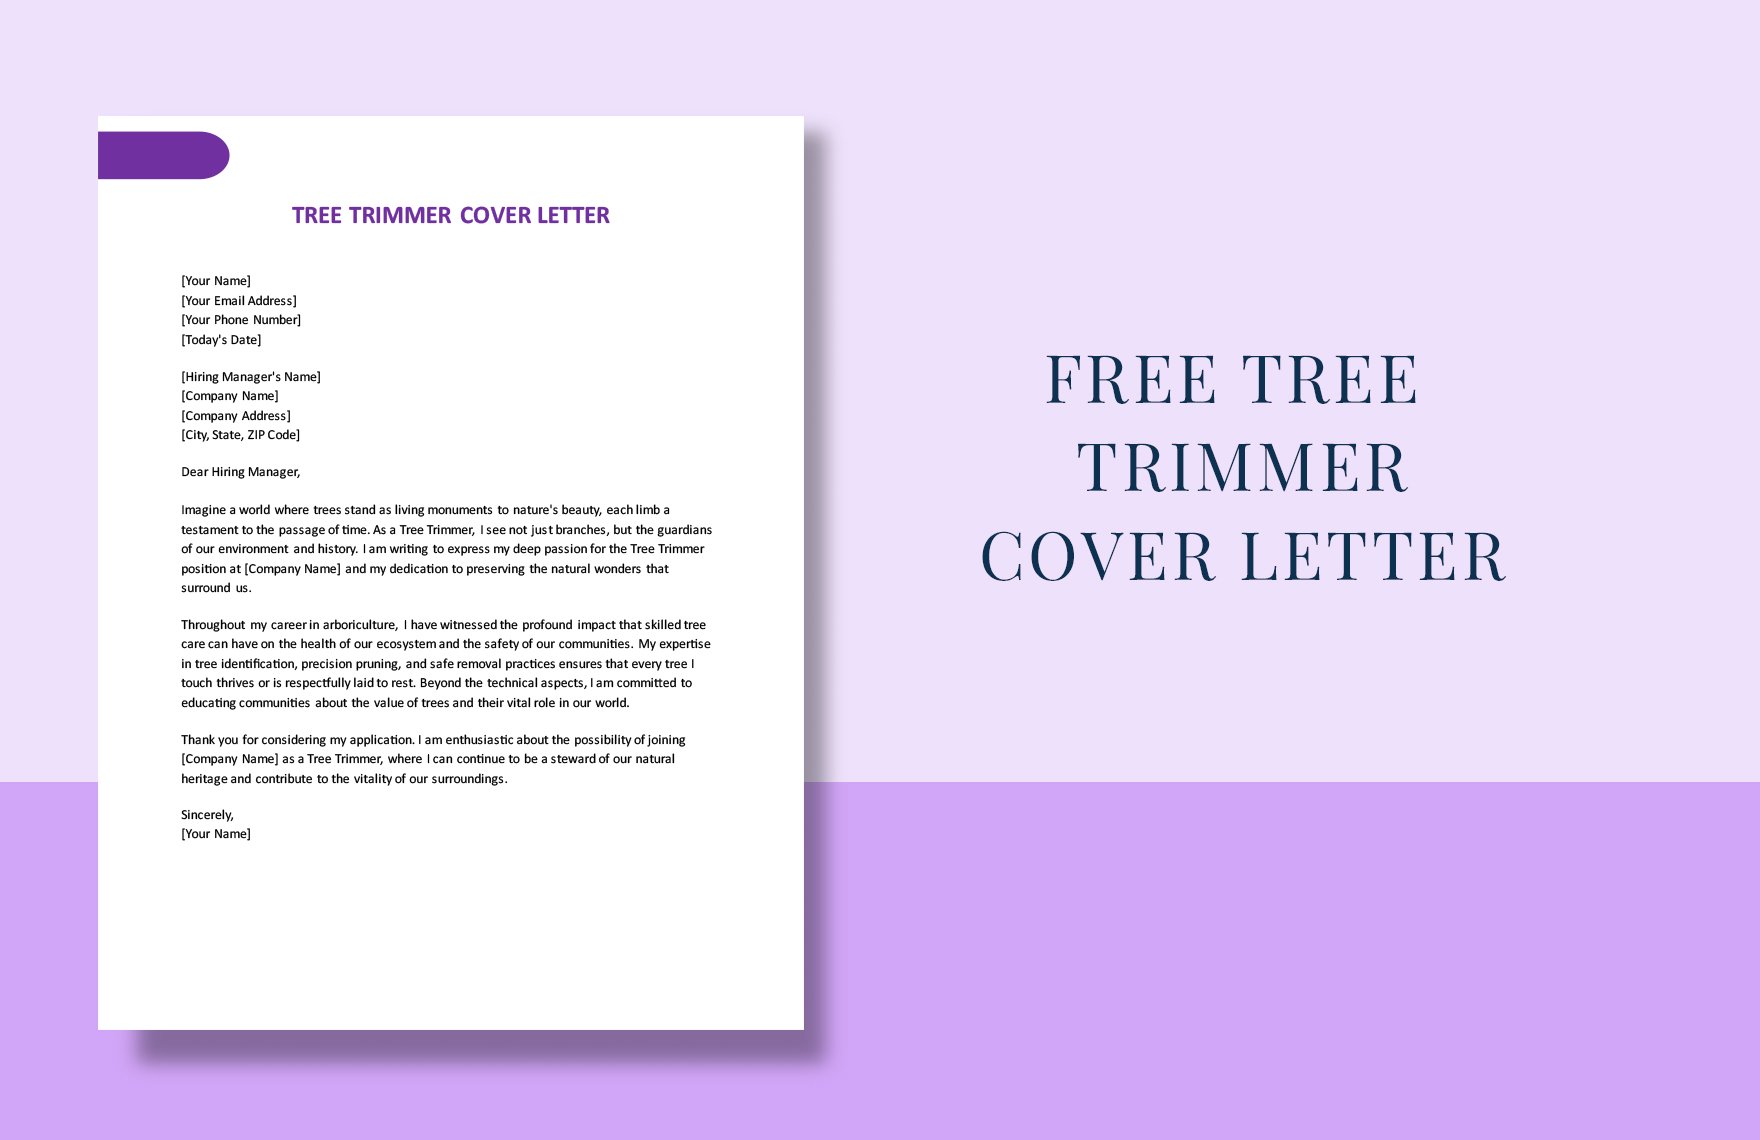 Tree Trimmer Cover Letter in Word, Google Docs, PDF